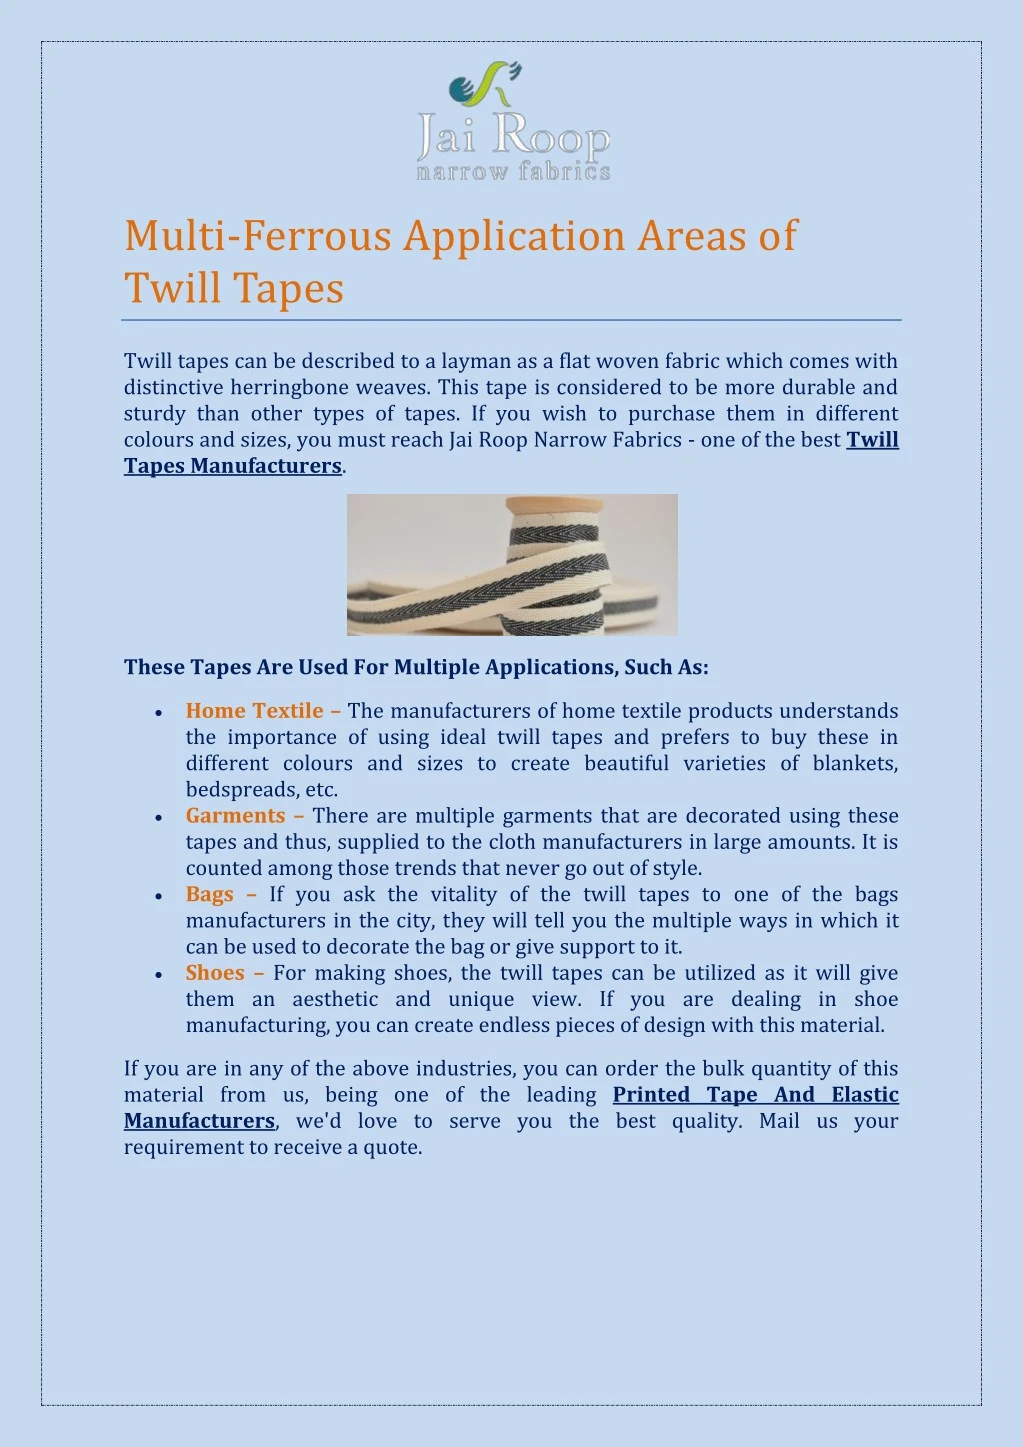 multi ferrous application areas of twill tapes